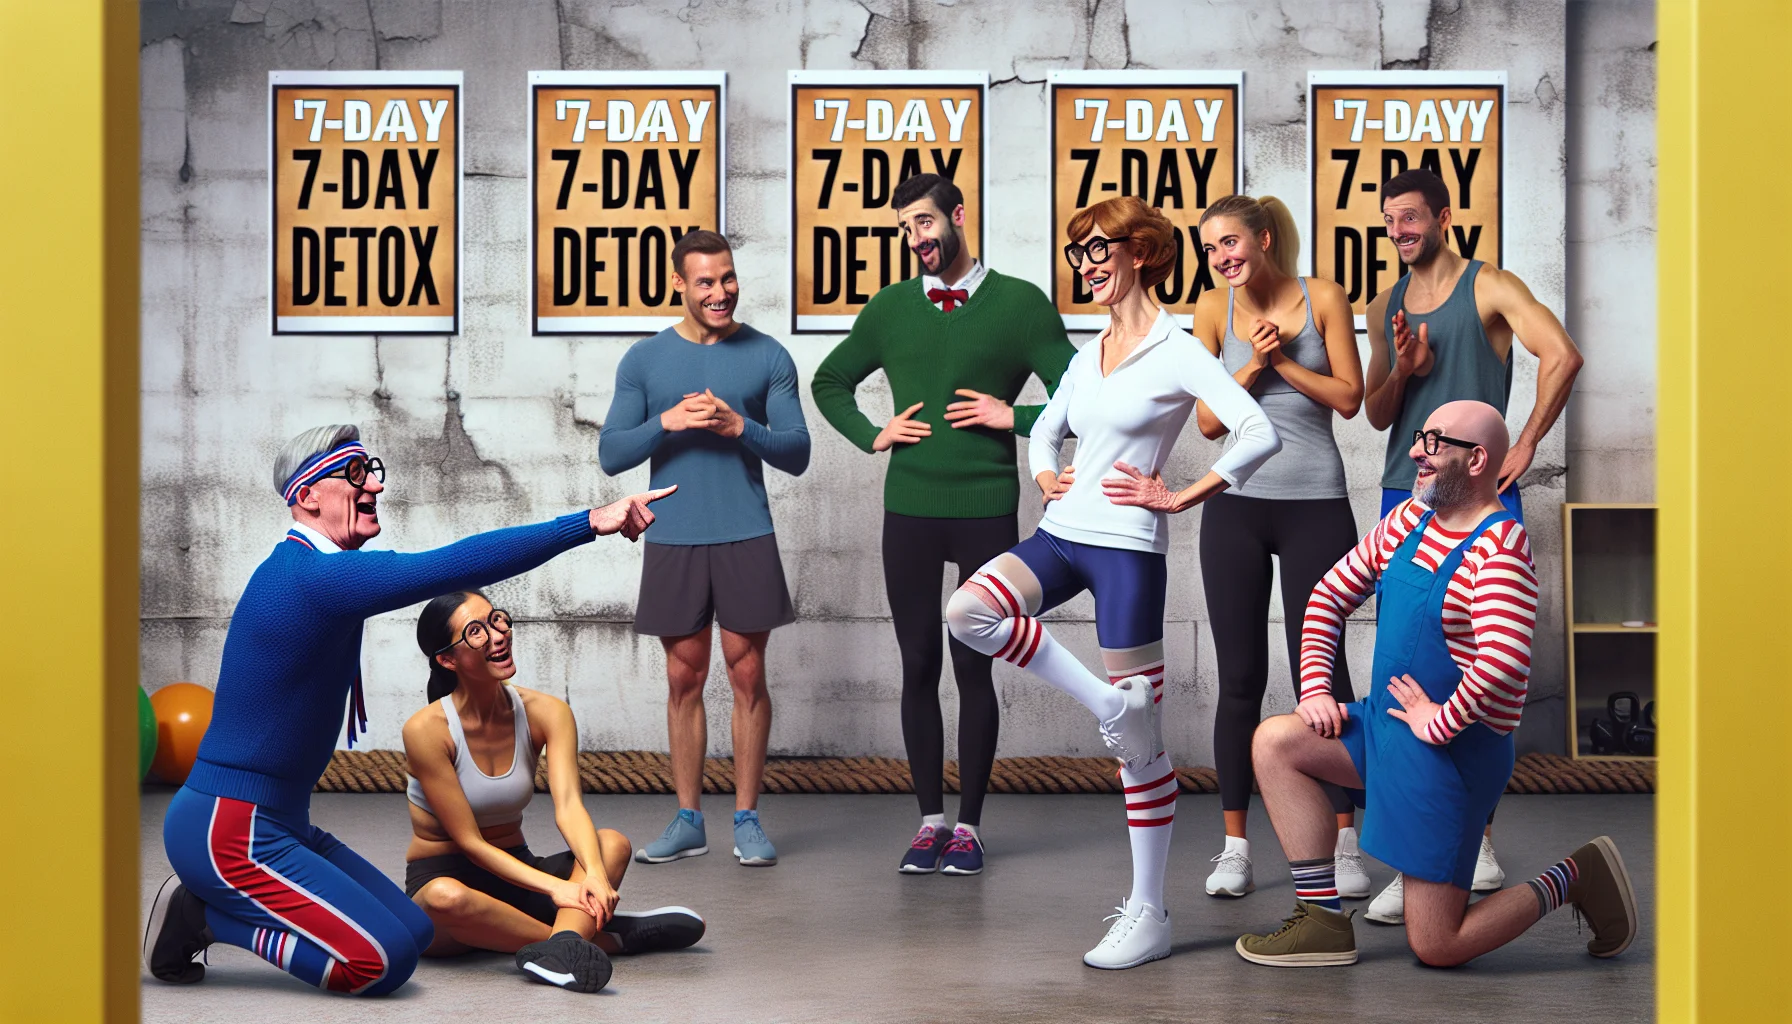 Create a humorous yet encouraging scenario that highlights an anonymous fitness coach's 7-Day Detox program. The image should depict the coach, a physically fit Caucasian woman, interacting positively with a diverse group of participants. The coach should be demonstrating an exercise move, and the participants demonstrating various levels of success, creating a comical scene that inspires people to step up their fitness routines. The setting is at a fitness studio with '7-Day Detox' posters hanging on the walls.